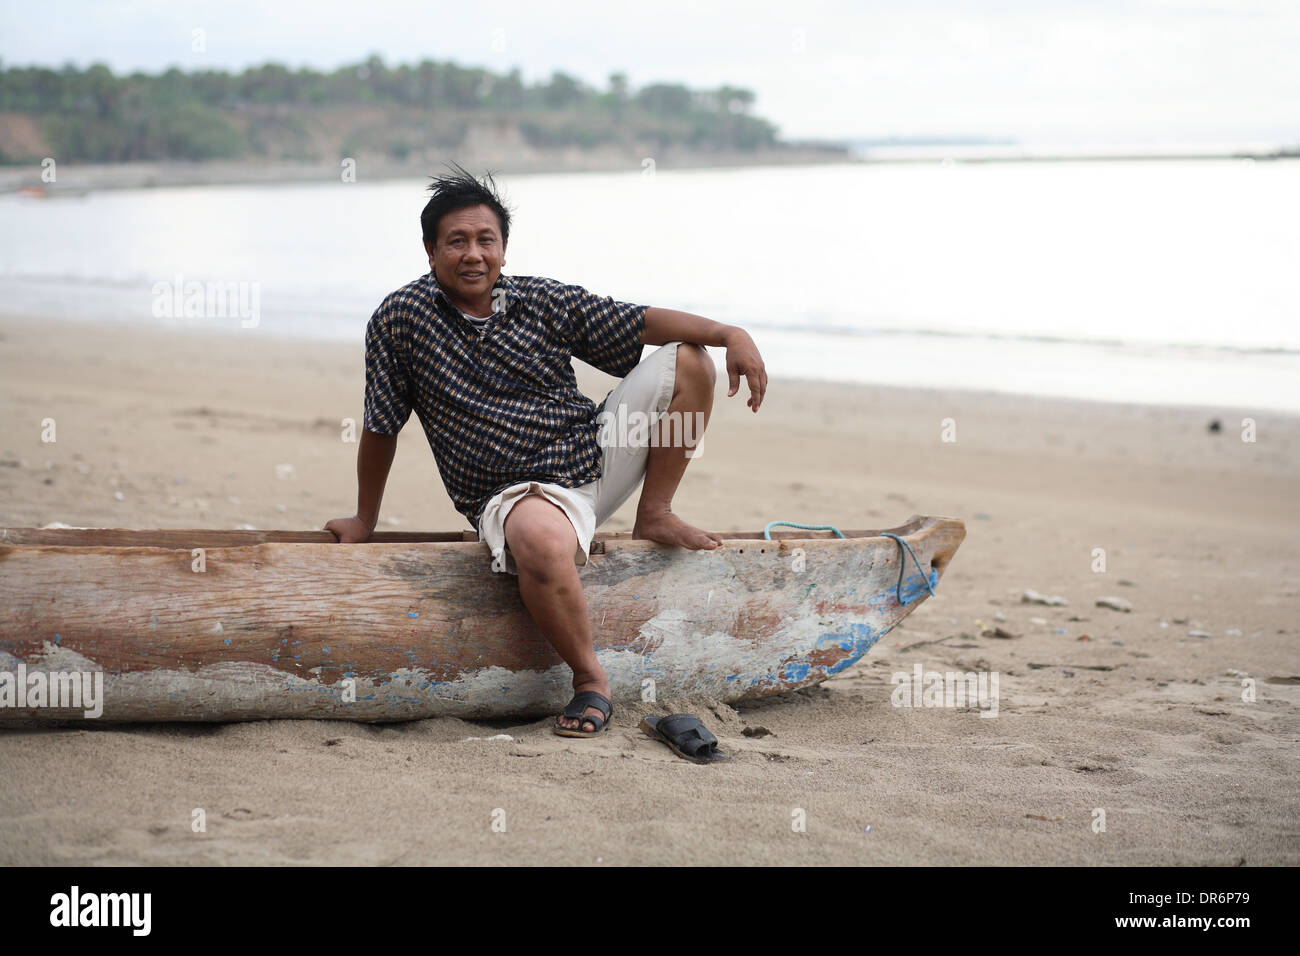 Man sitting on a canoe on the beach of Kupang, West Timor, Indonesia. Nov 2005 Stock Photo